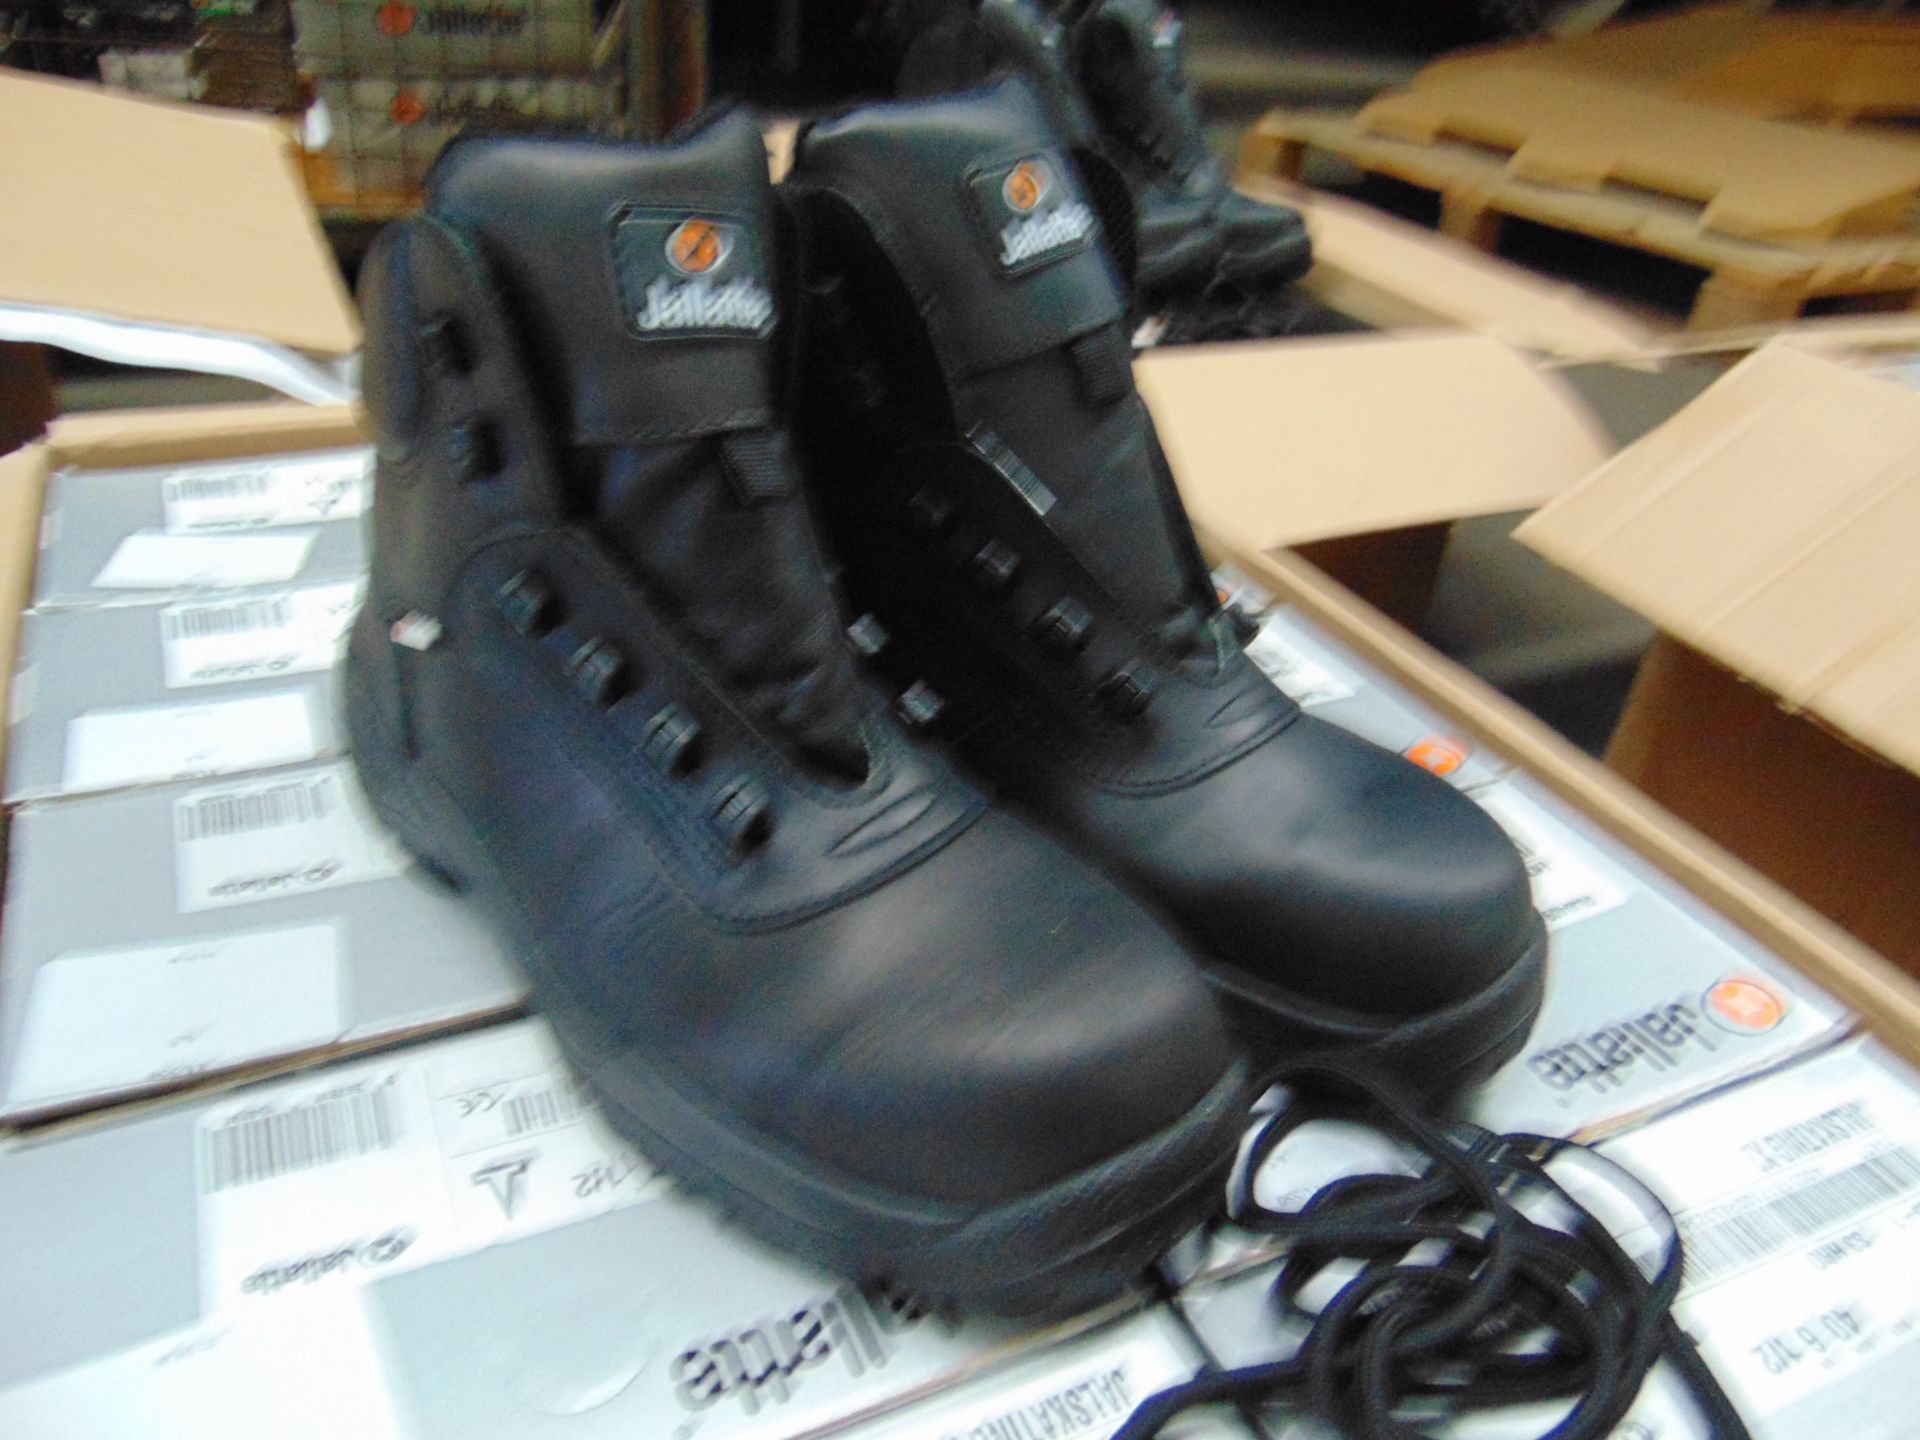 Qty 10 x UNISSUED Jallatte Safety Boots Size 6.5 - Image 2 of 4